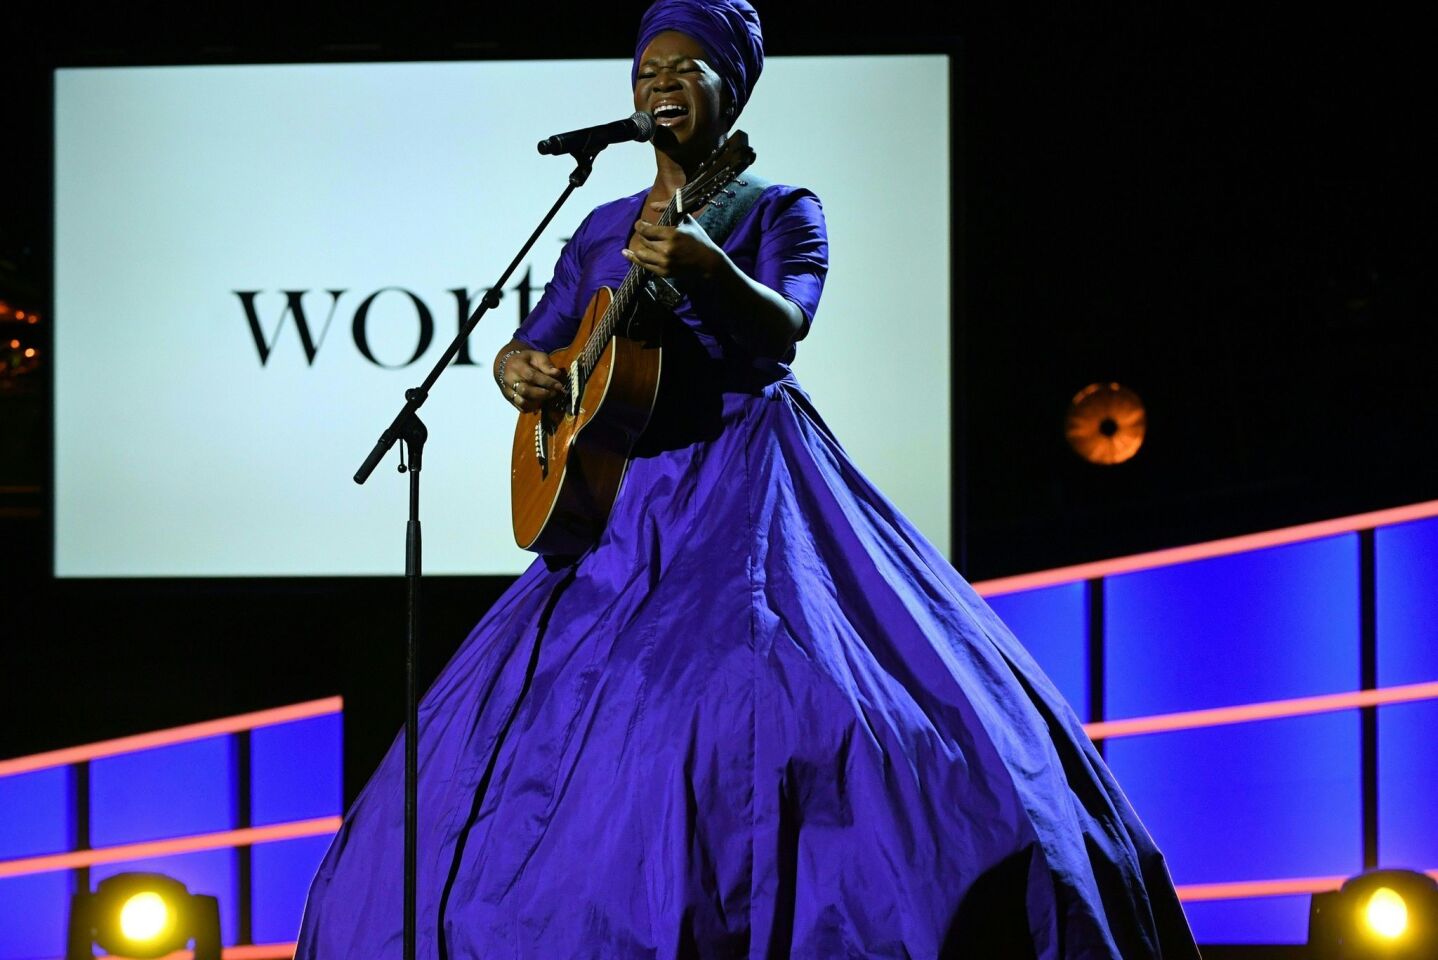 India Arie performs during the 60th Grammy Awards pre-telecast show in New York.